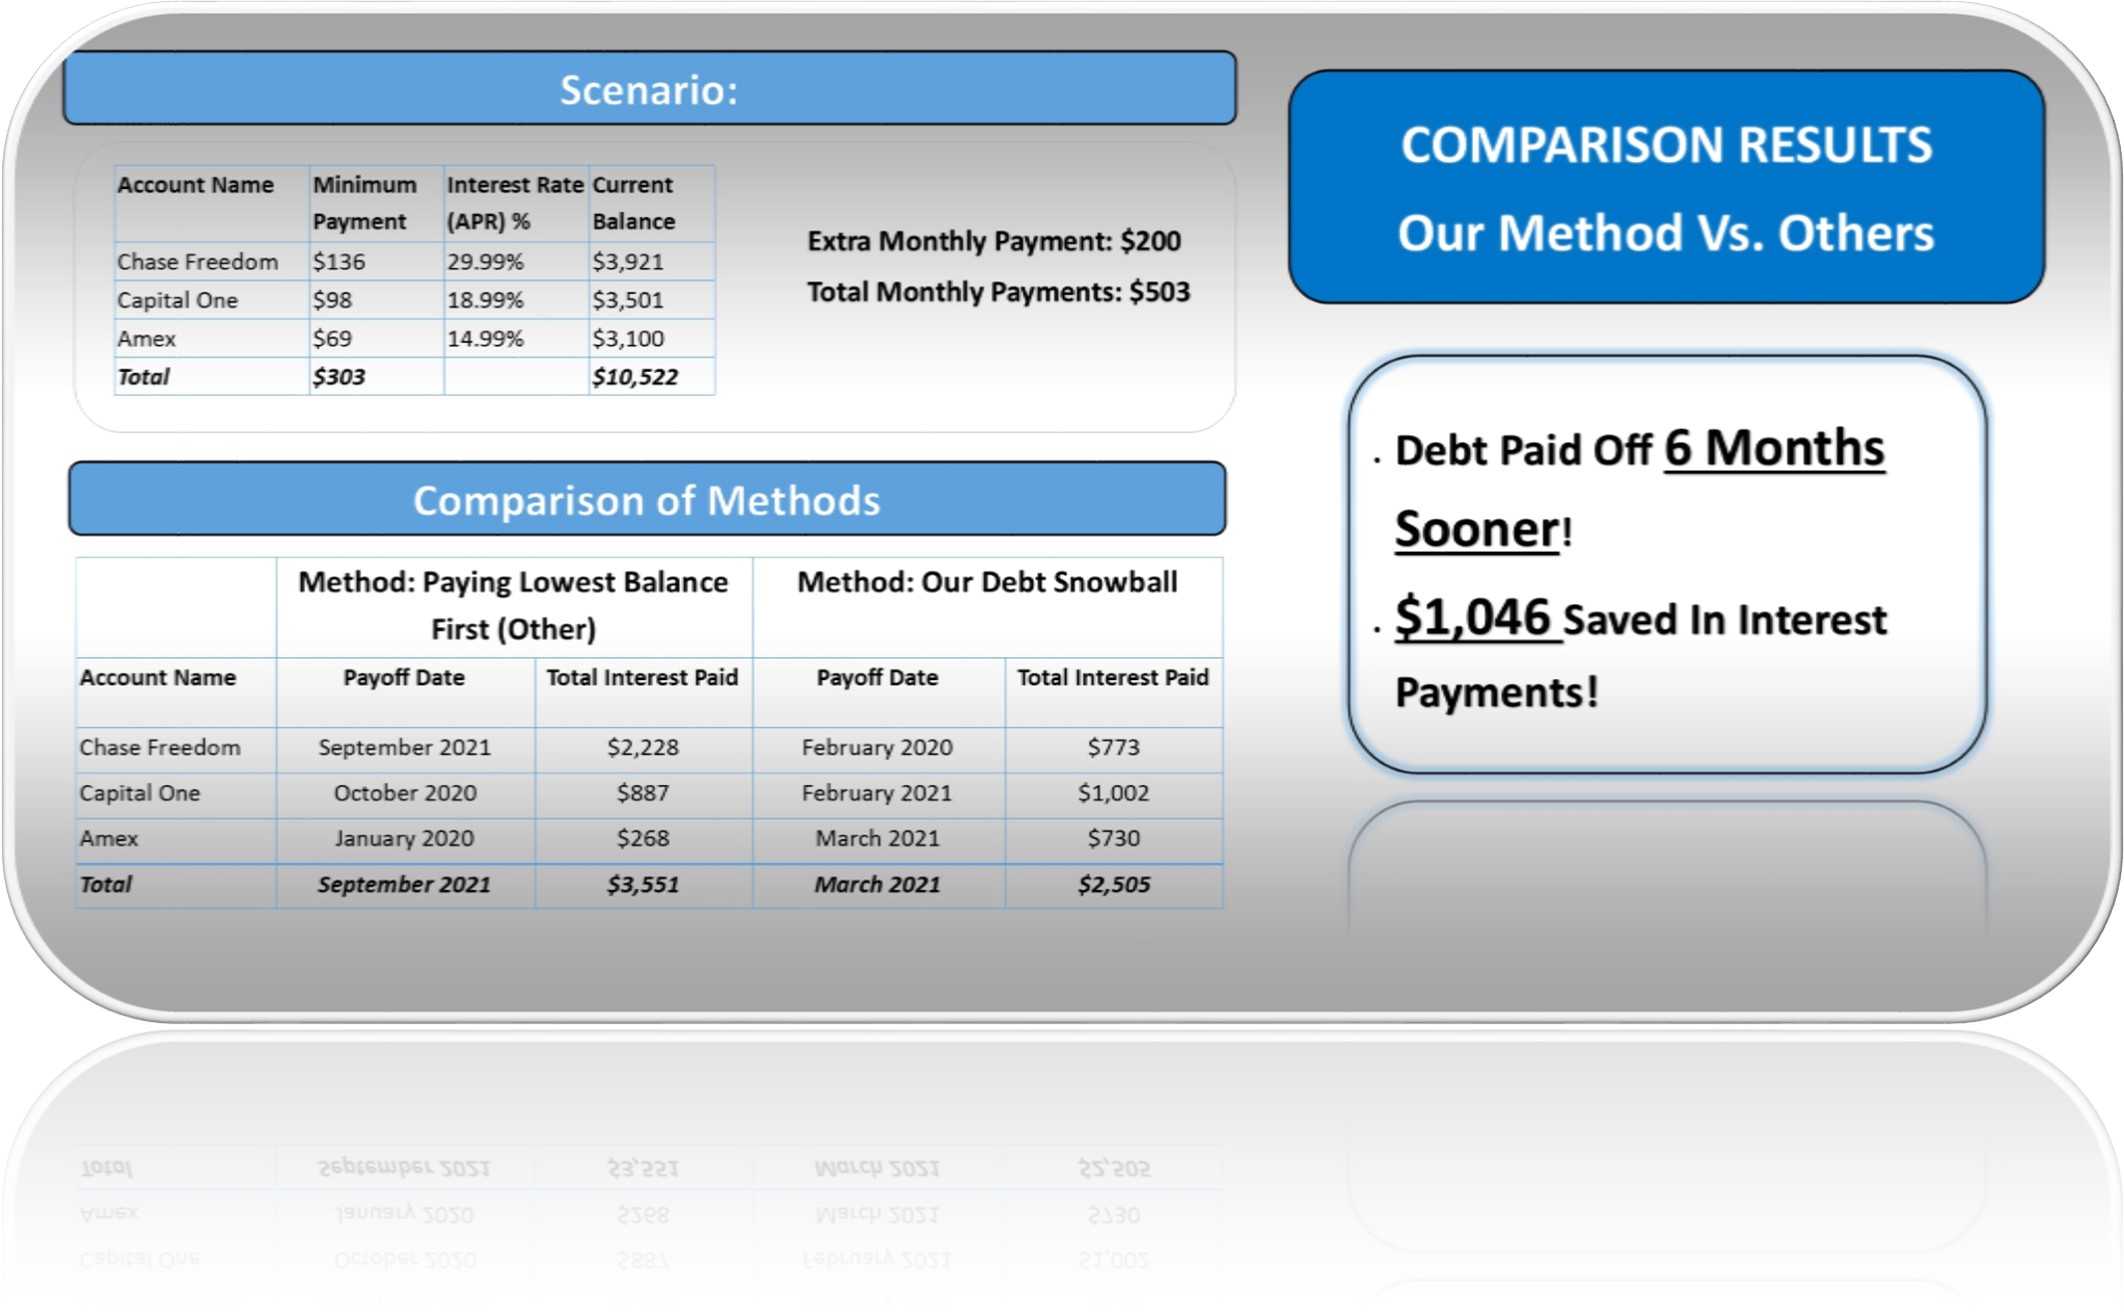 Credit Card Payoff Preadsheet Debt Nowball Calculator Excel Within Credit Card Interest Calculator Excel Template